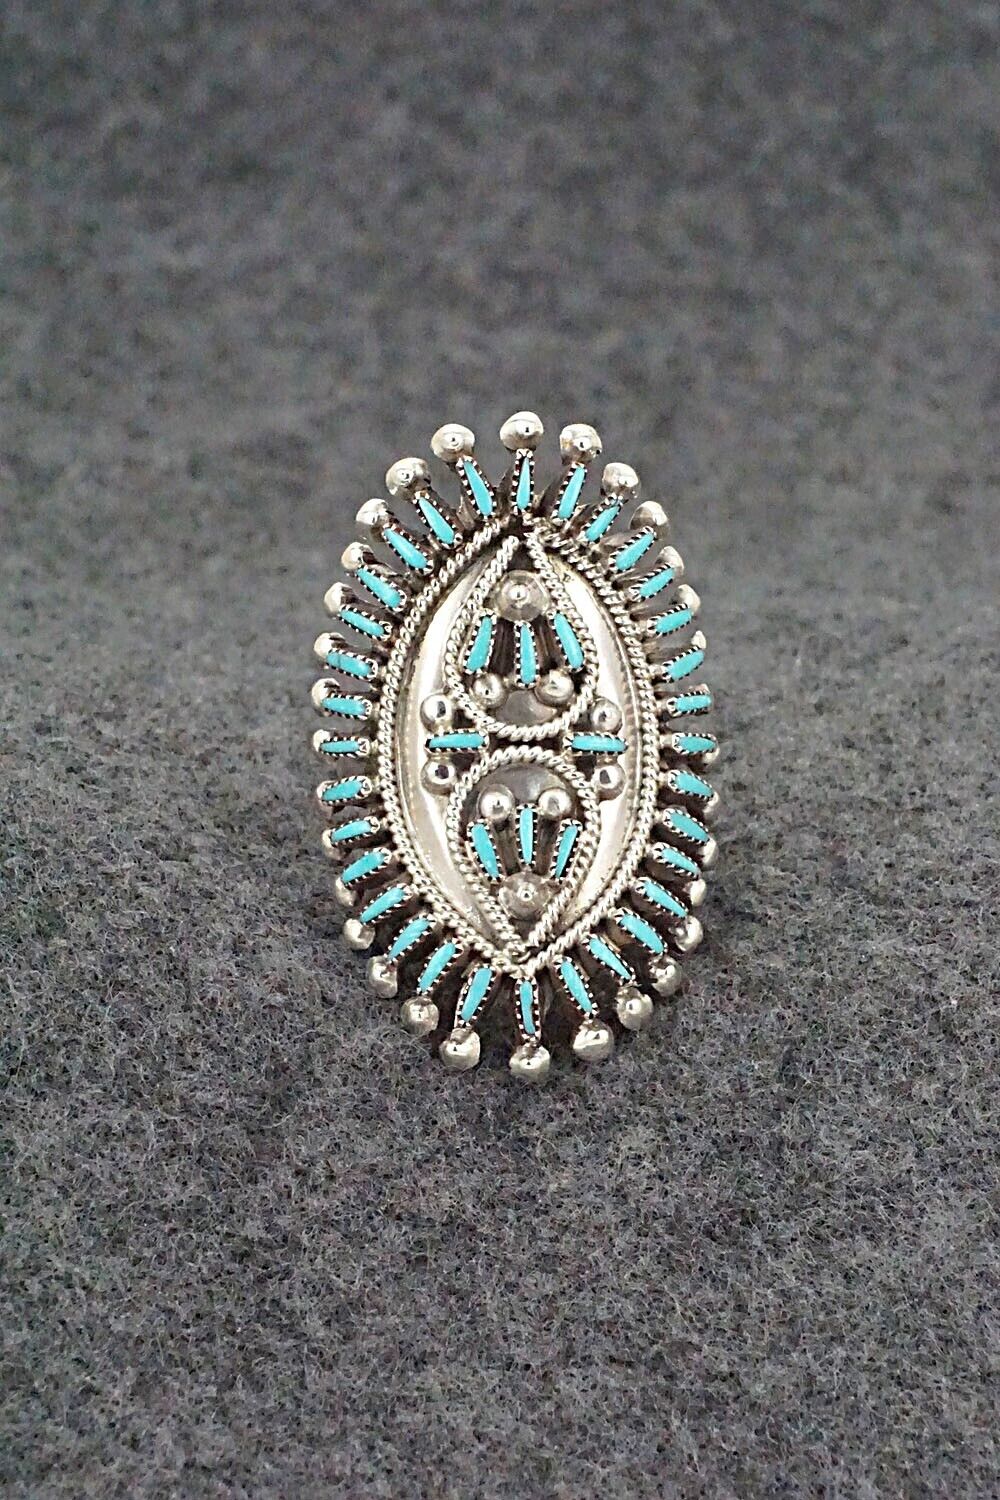 Turquoise & Sterling Silver Ring - Vincent Johnson - Size 8.5